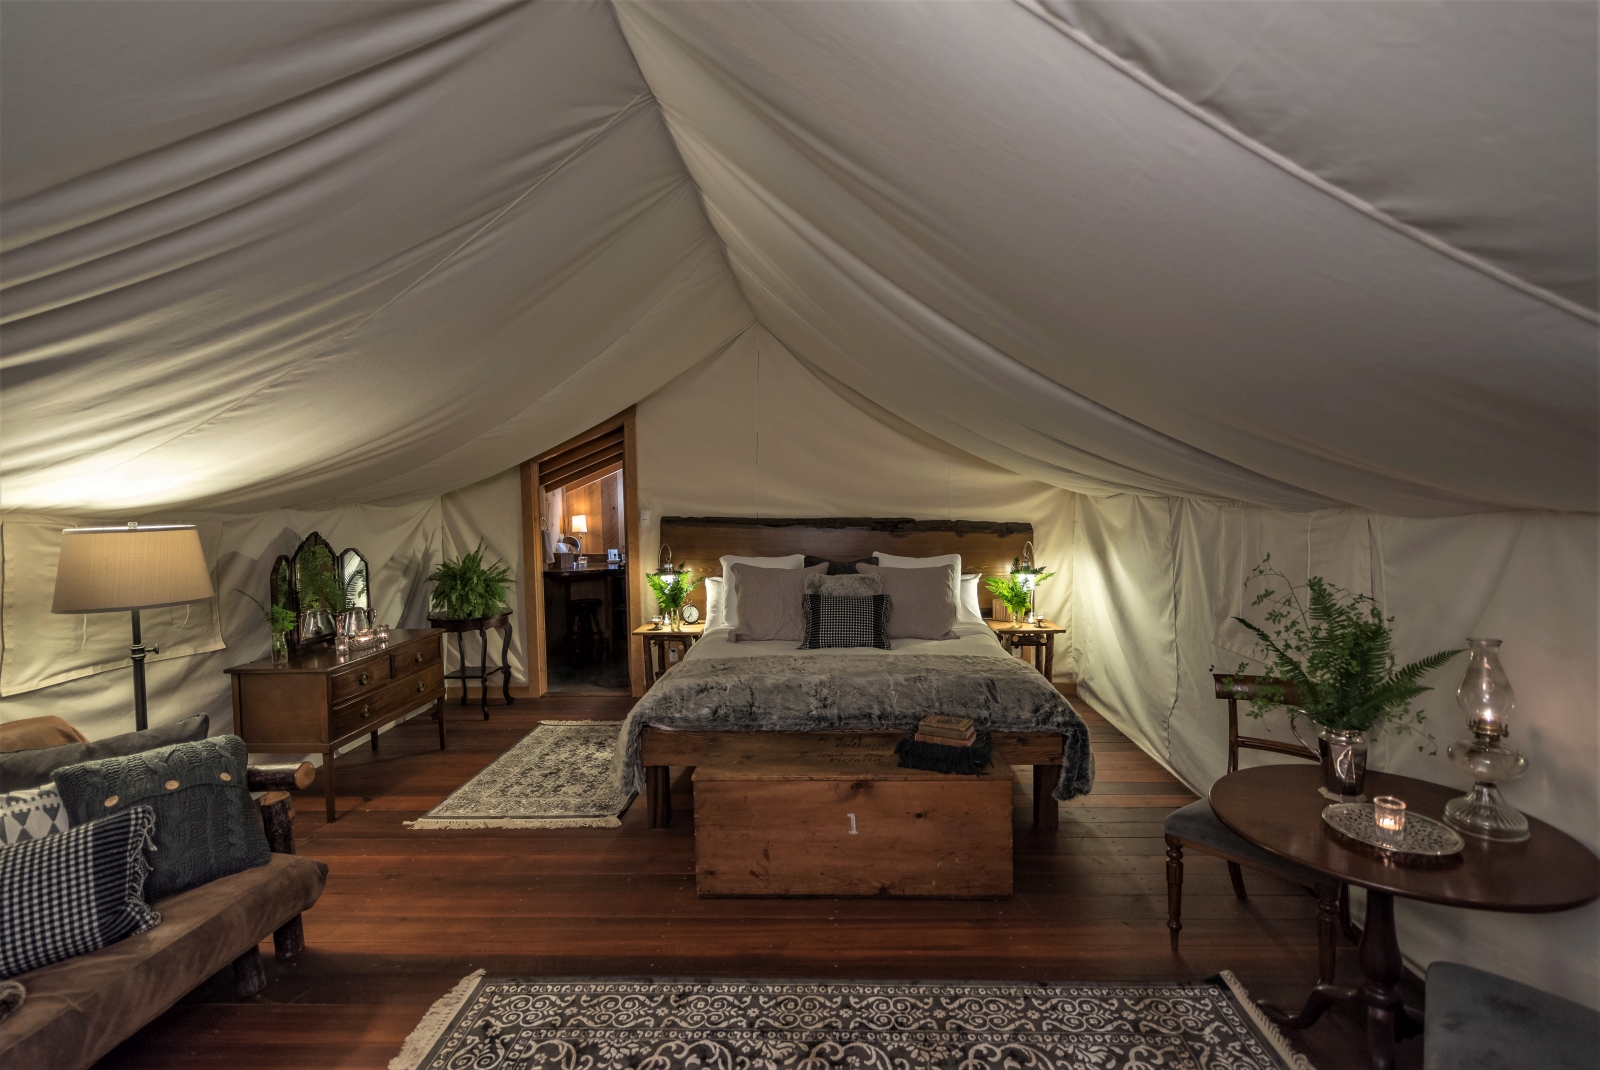 Interior of tent with double bed and sitting area, photo credit to Christopher Morris